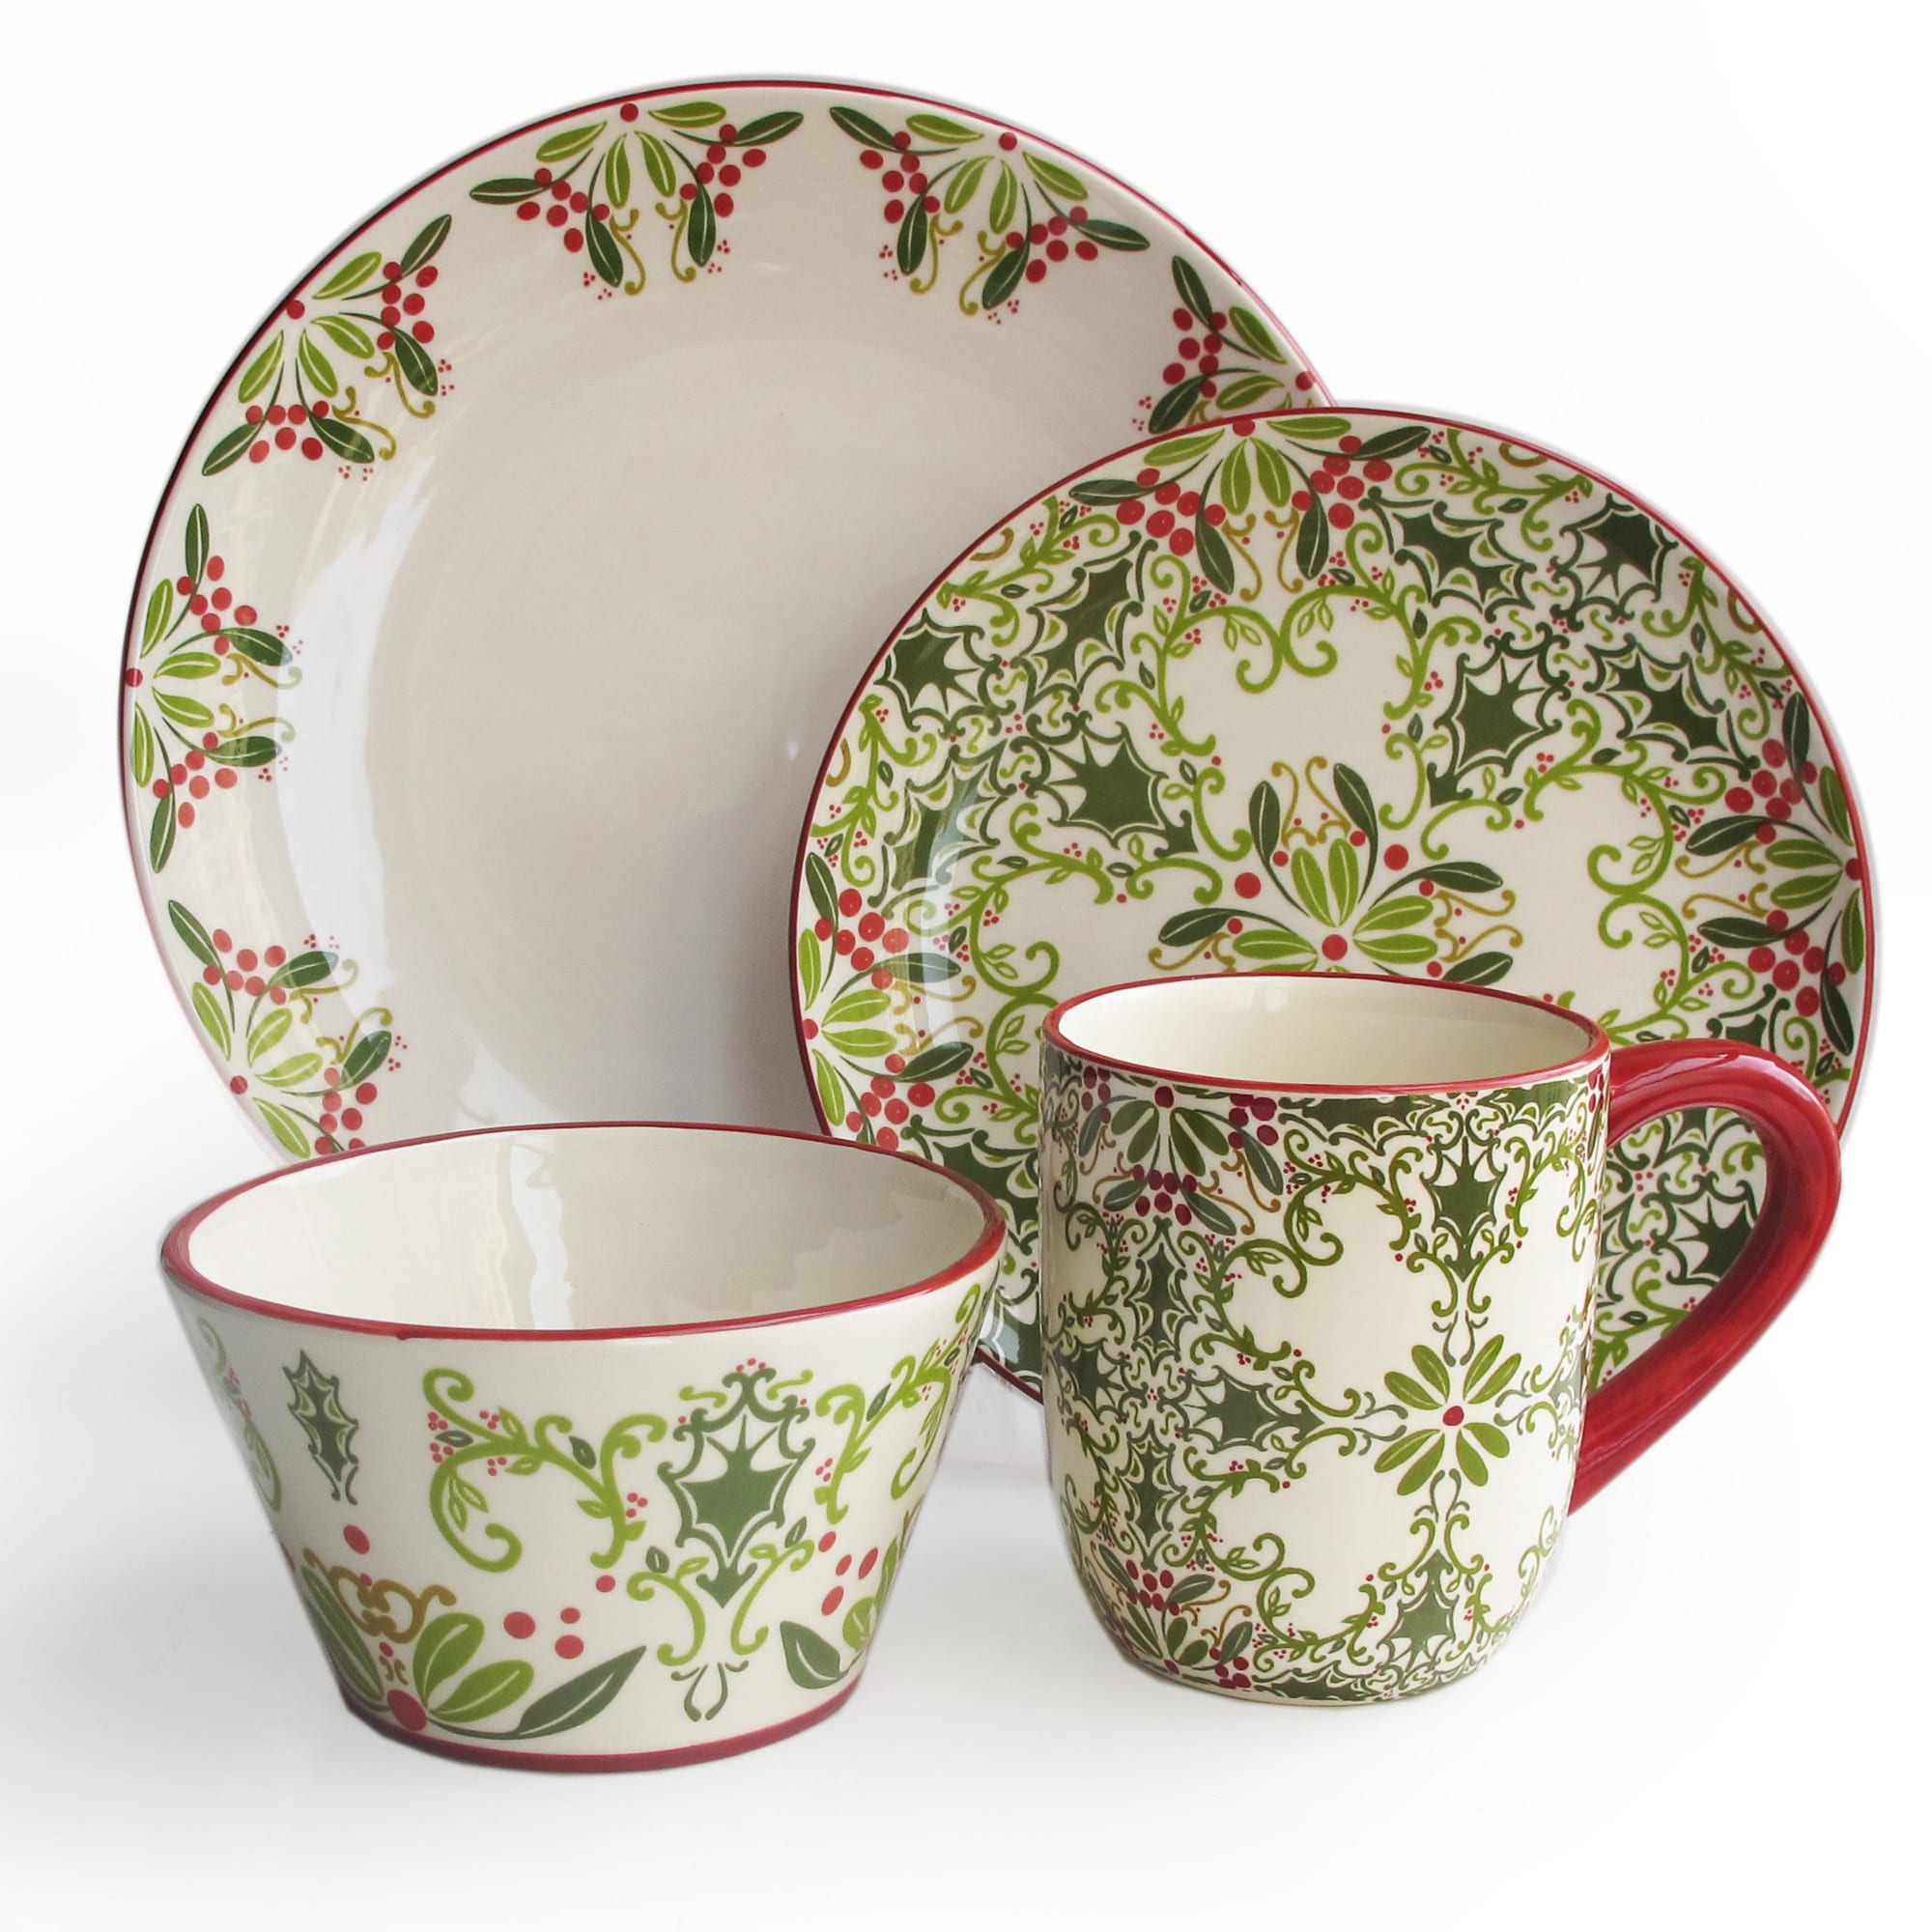 Stoneware Dinnerware Sets Clearance - Home Ideas